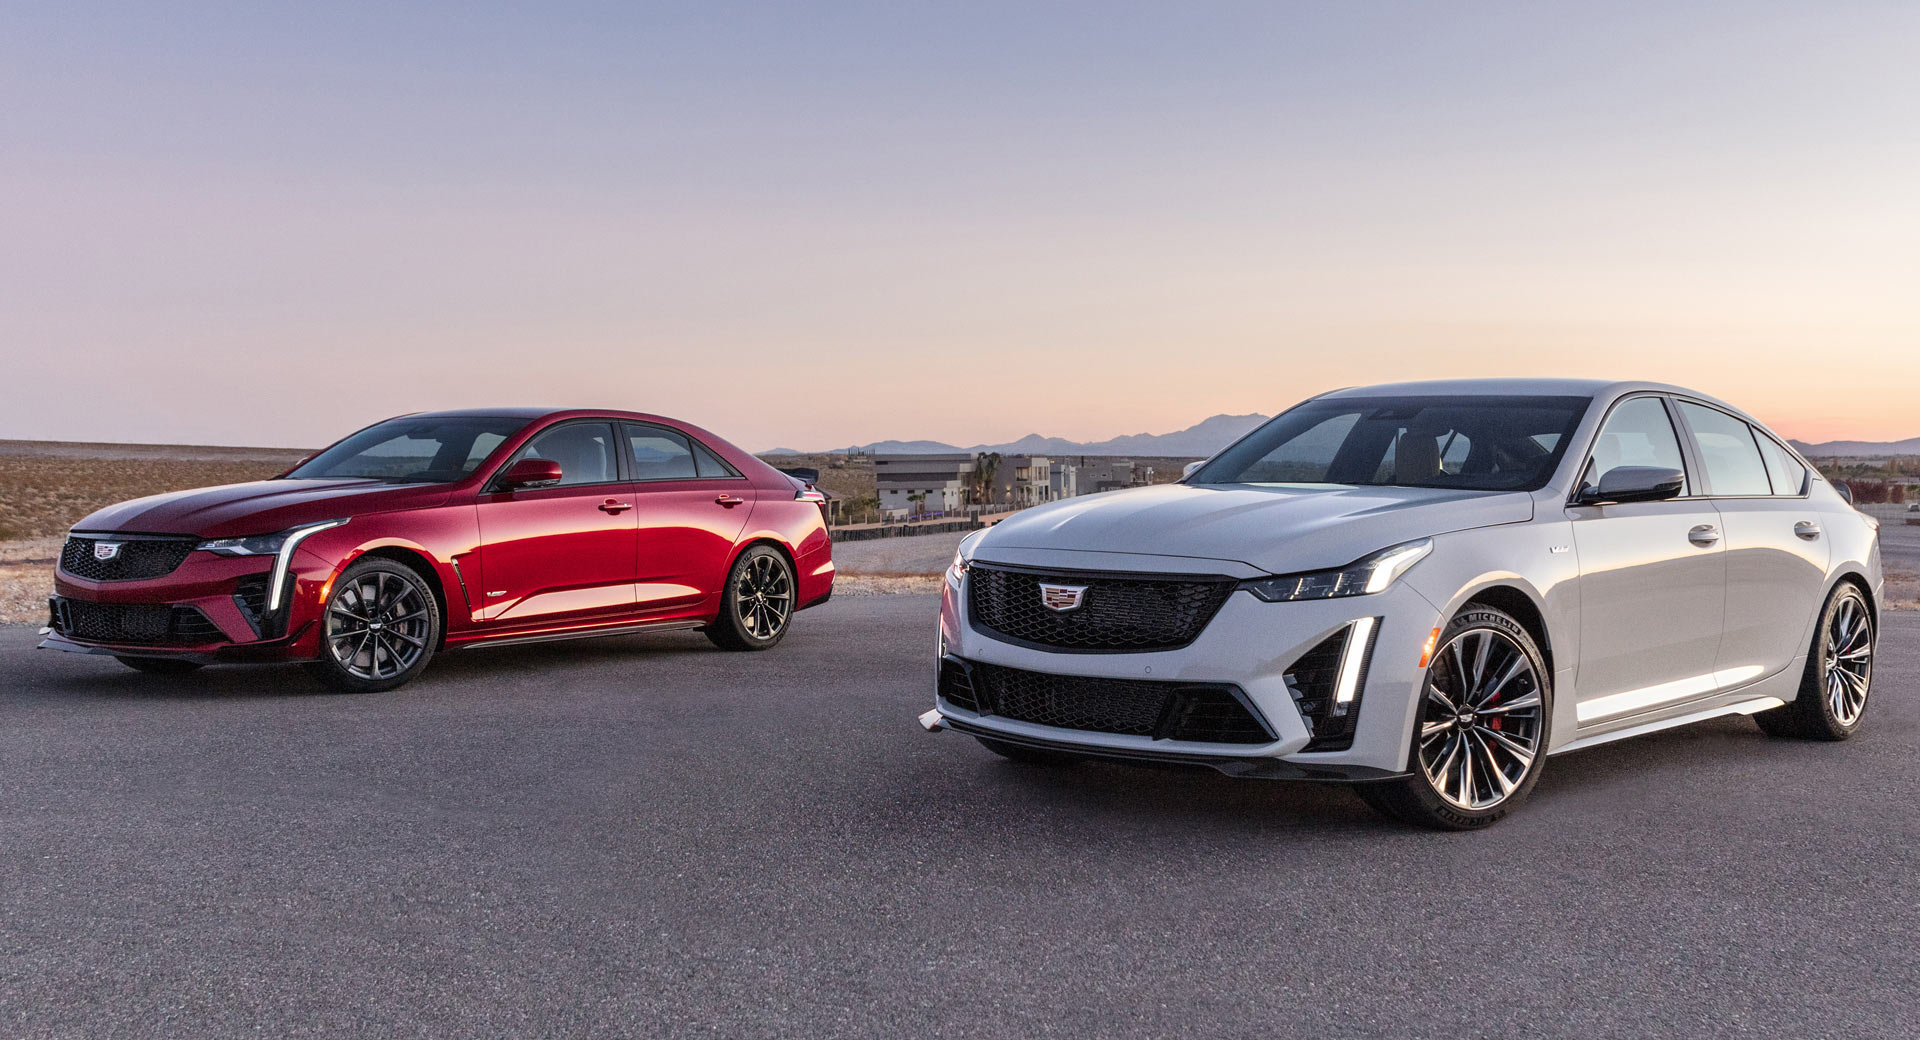 2022 Cadillac CT4-V and CT5-V Blackwings are shown before their debut on Monday